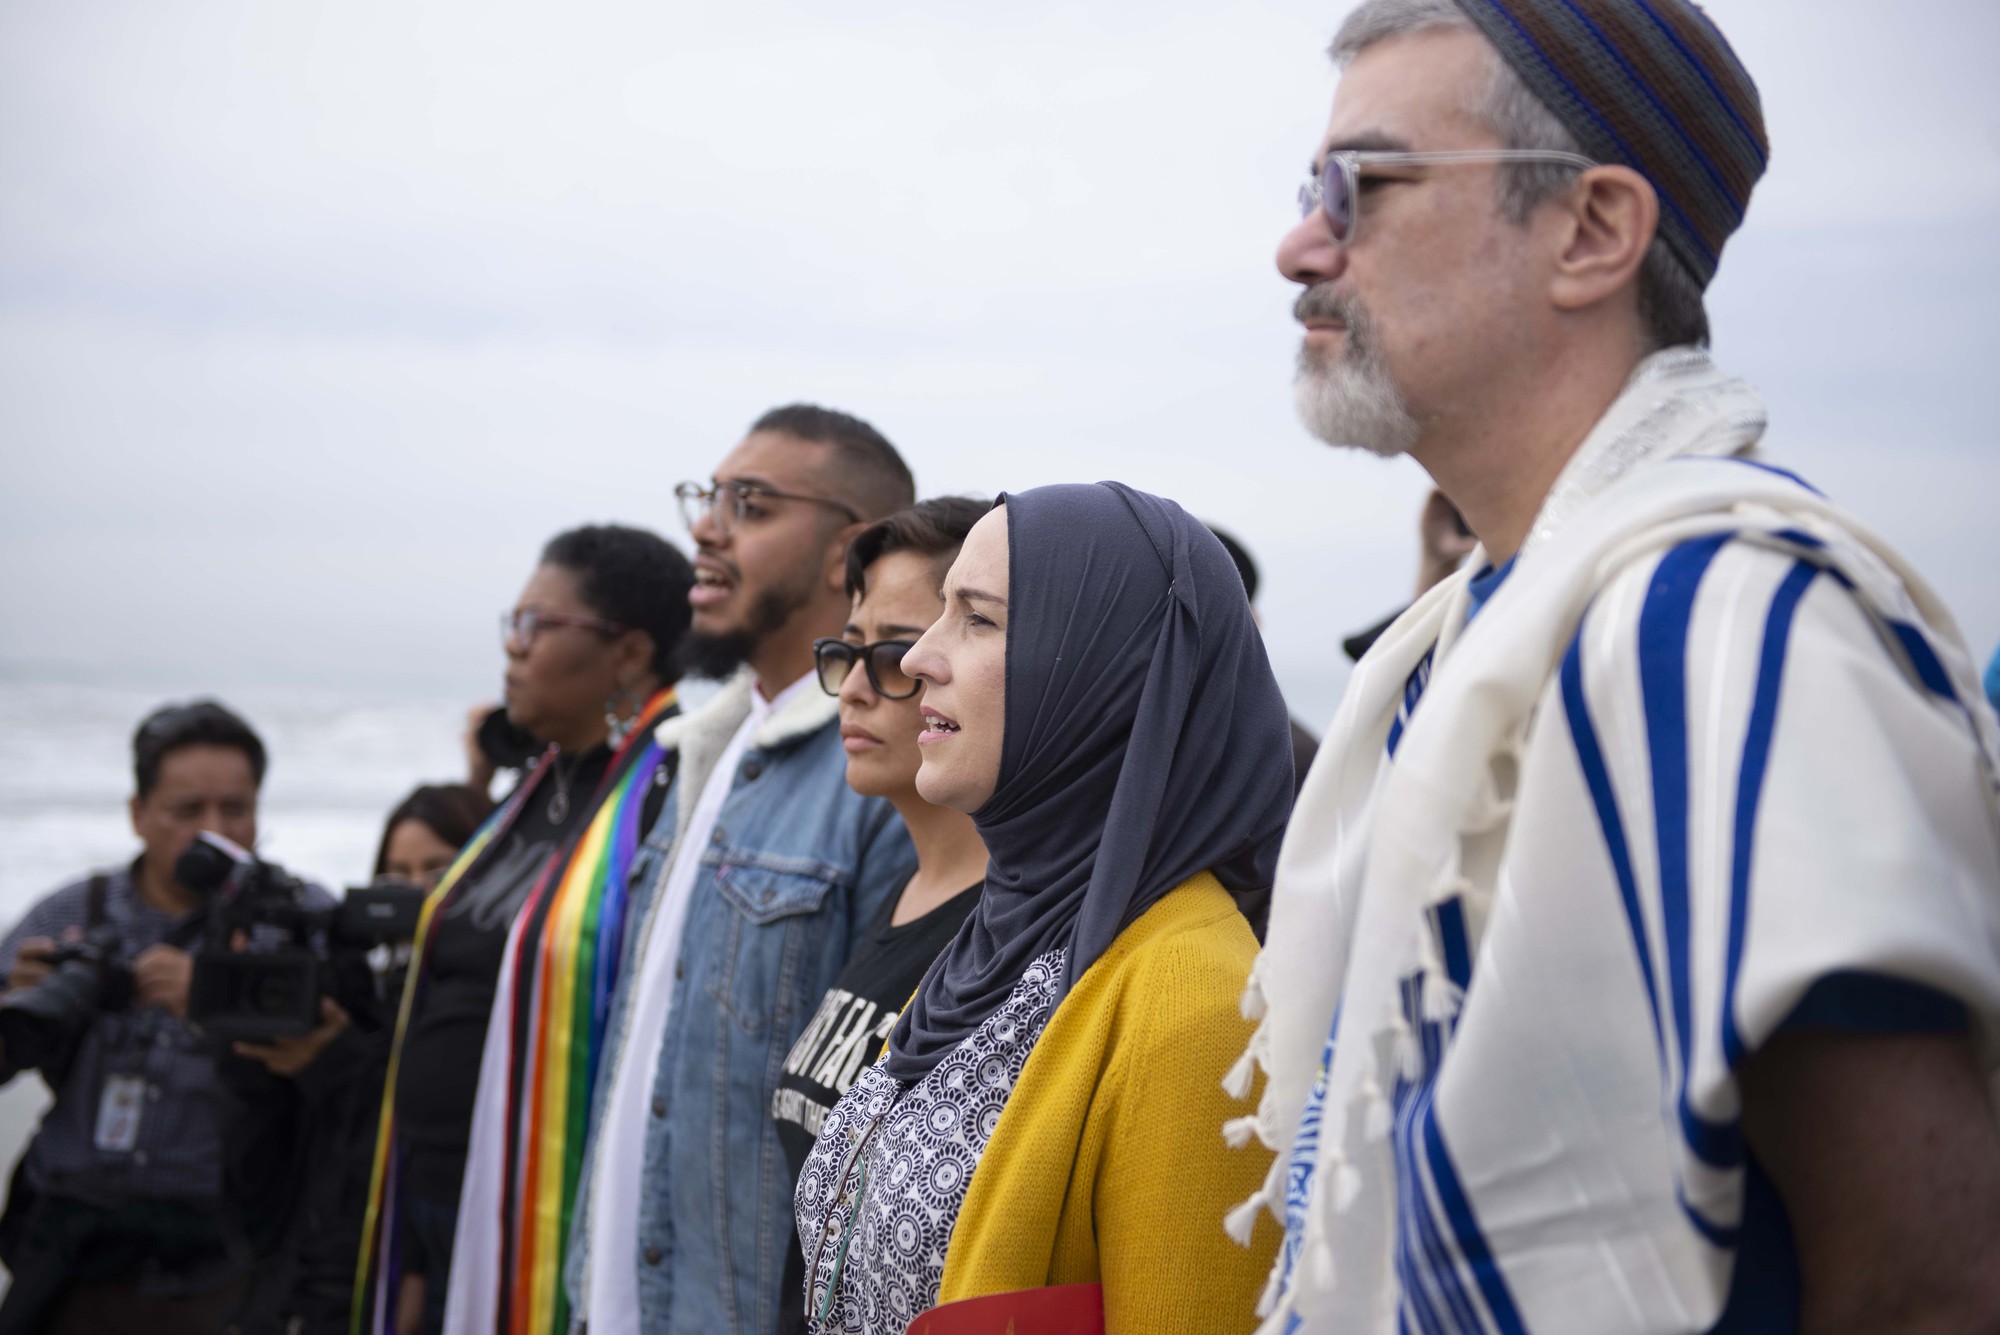 Building an intersectional approach to confront antisemitism 